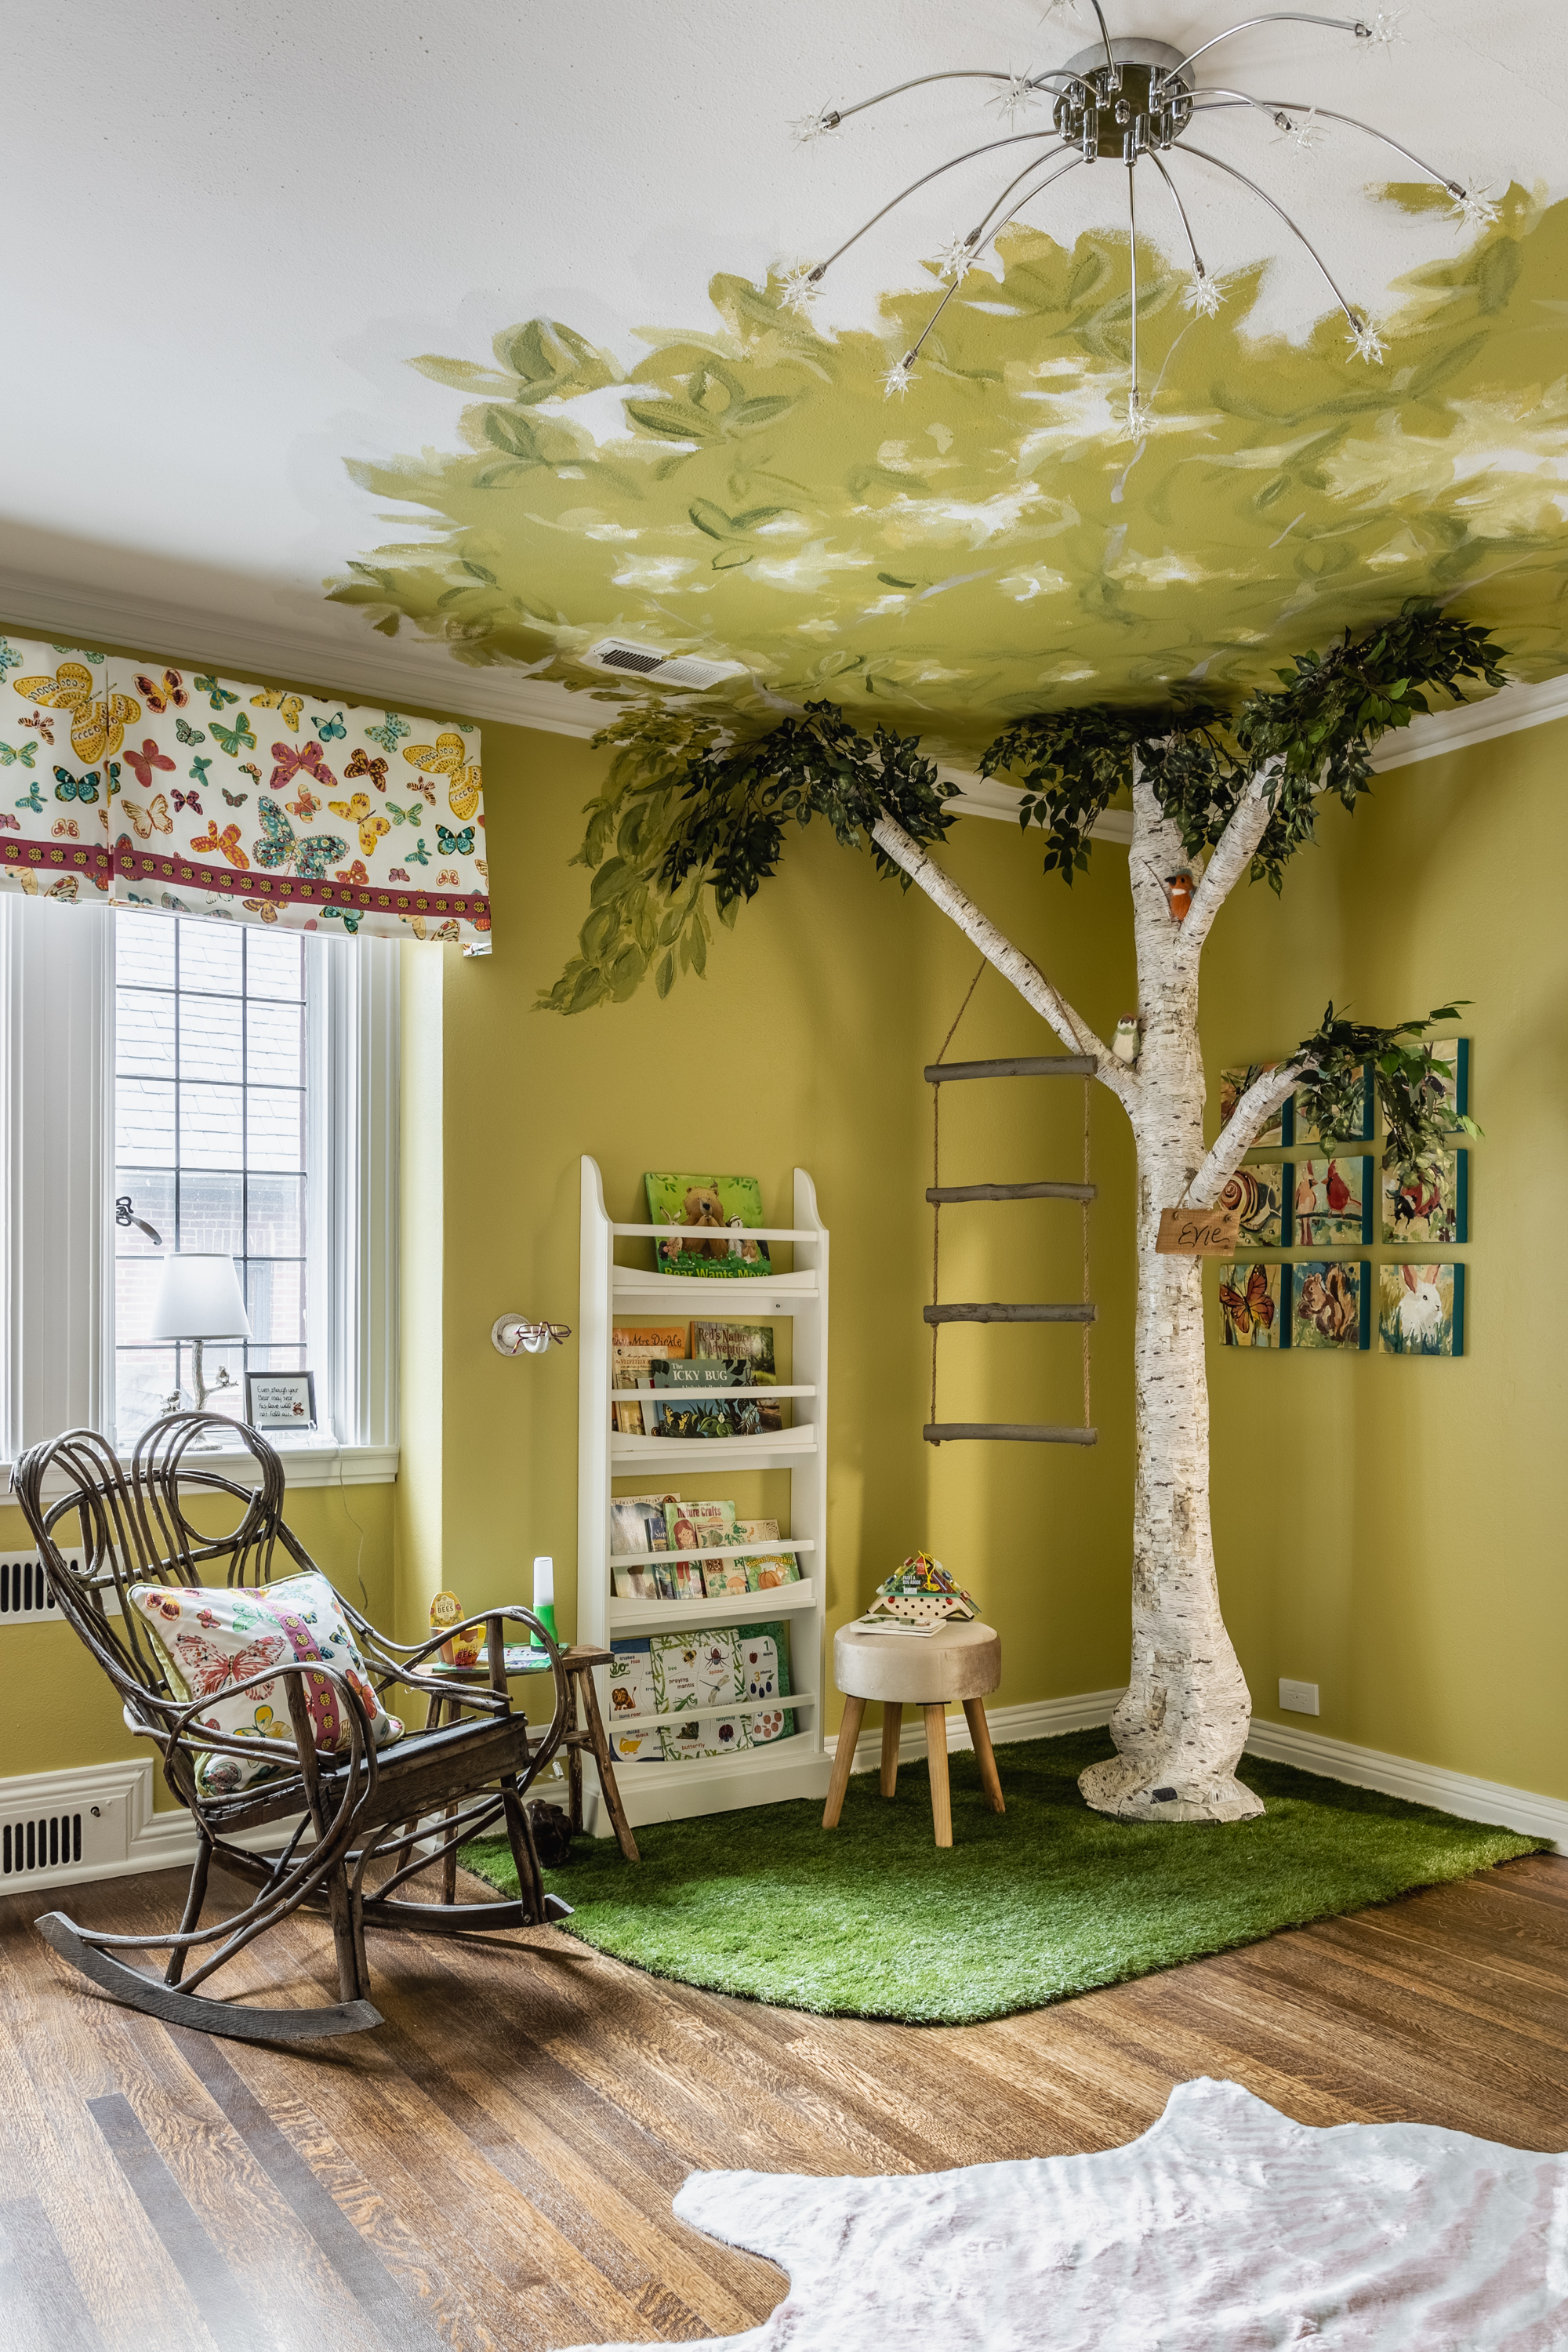 Maryellen Hodapp and Christy Soldatis of Sassy Green Interiors made this child’s bedroom a not-so-secret garden year-round. Carpeting only this corner of the room separates the play area from the sleep area—important in a little one’s bedroom. The Monet Rocking Chair has a fanciful-organic vibe similar to that of the rocker here.
